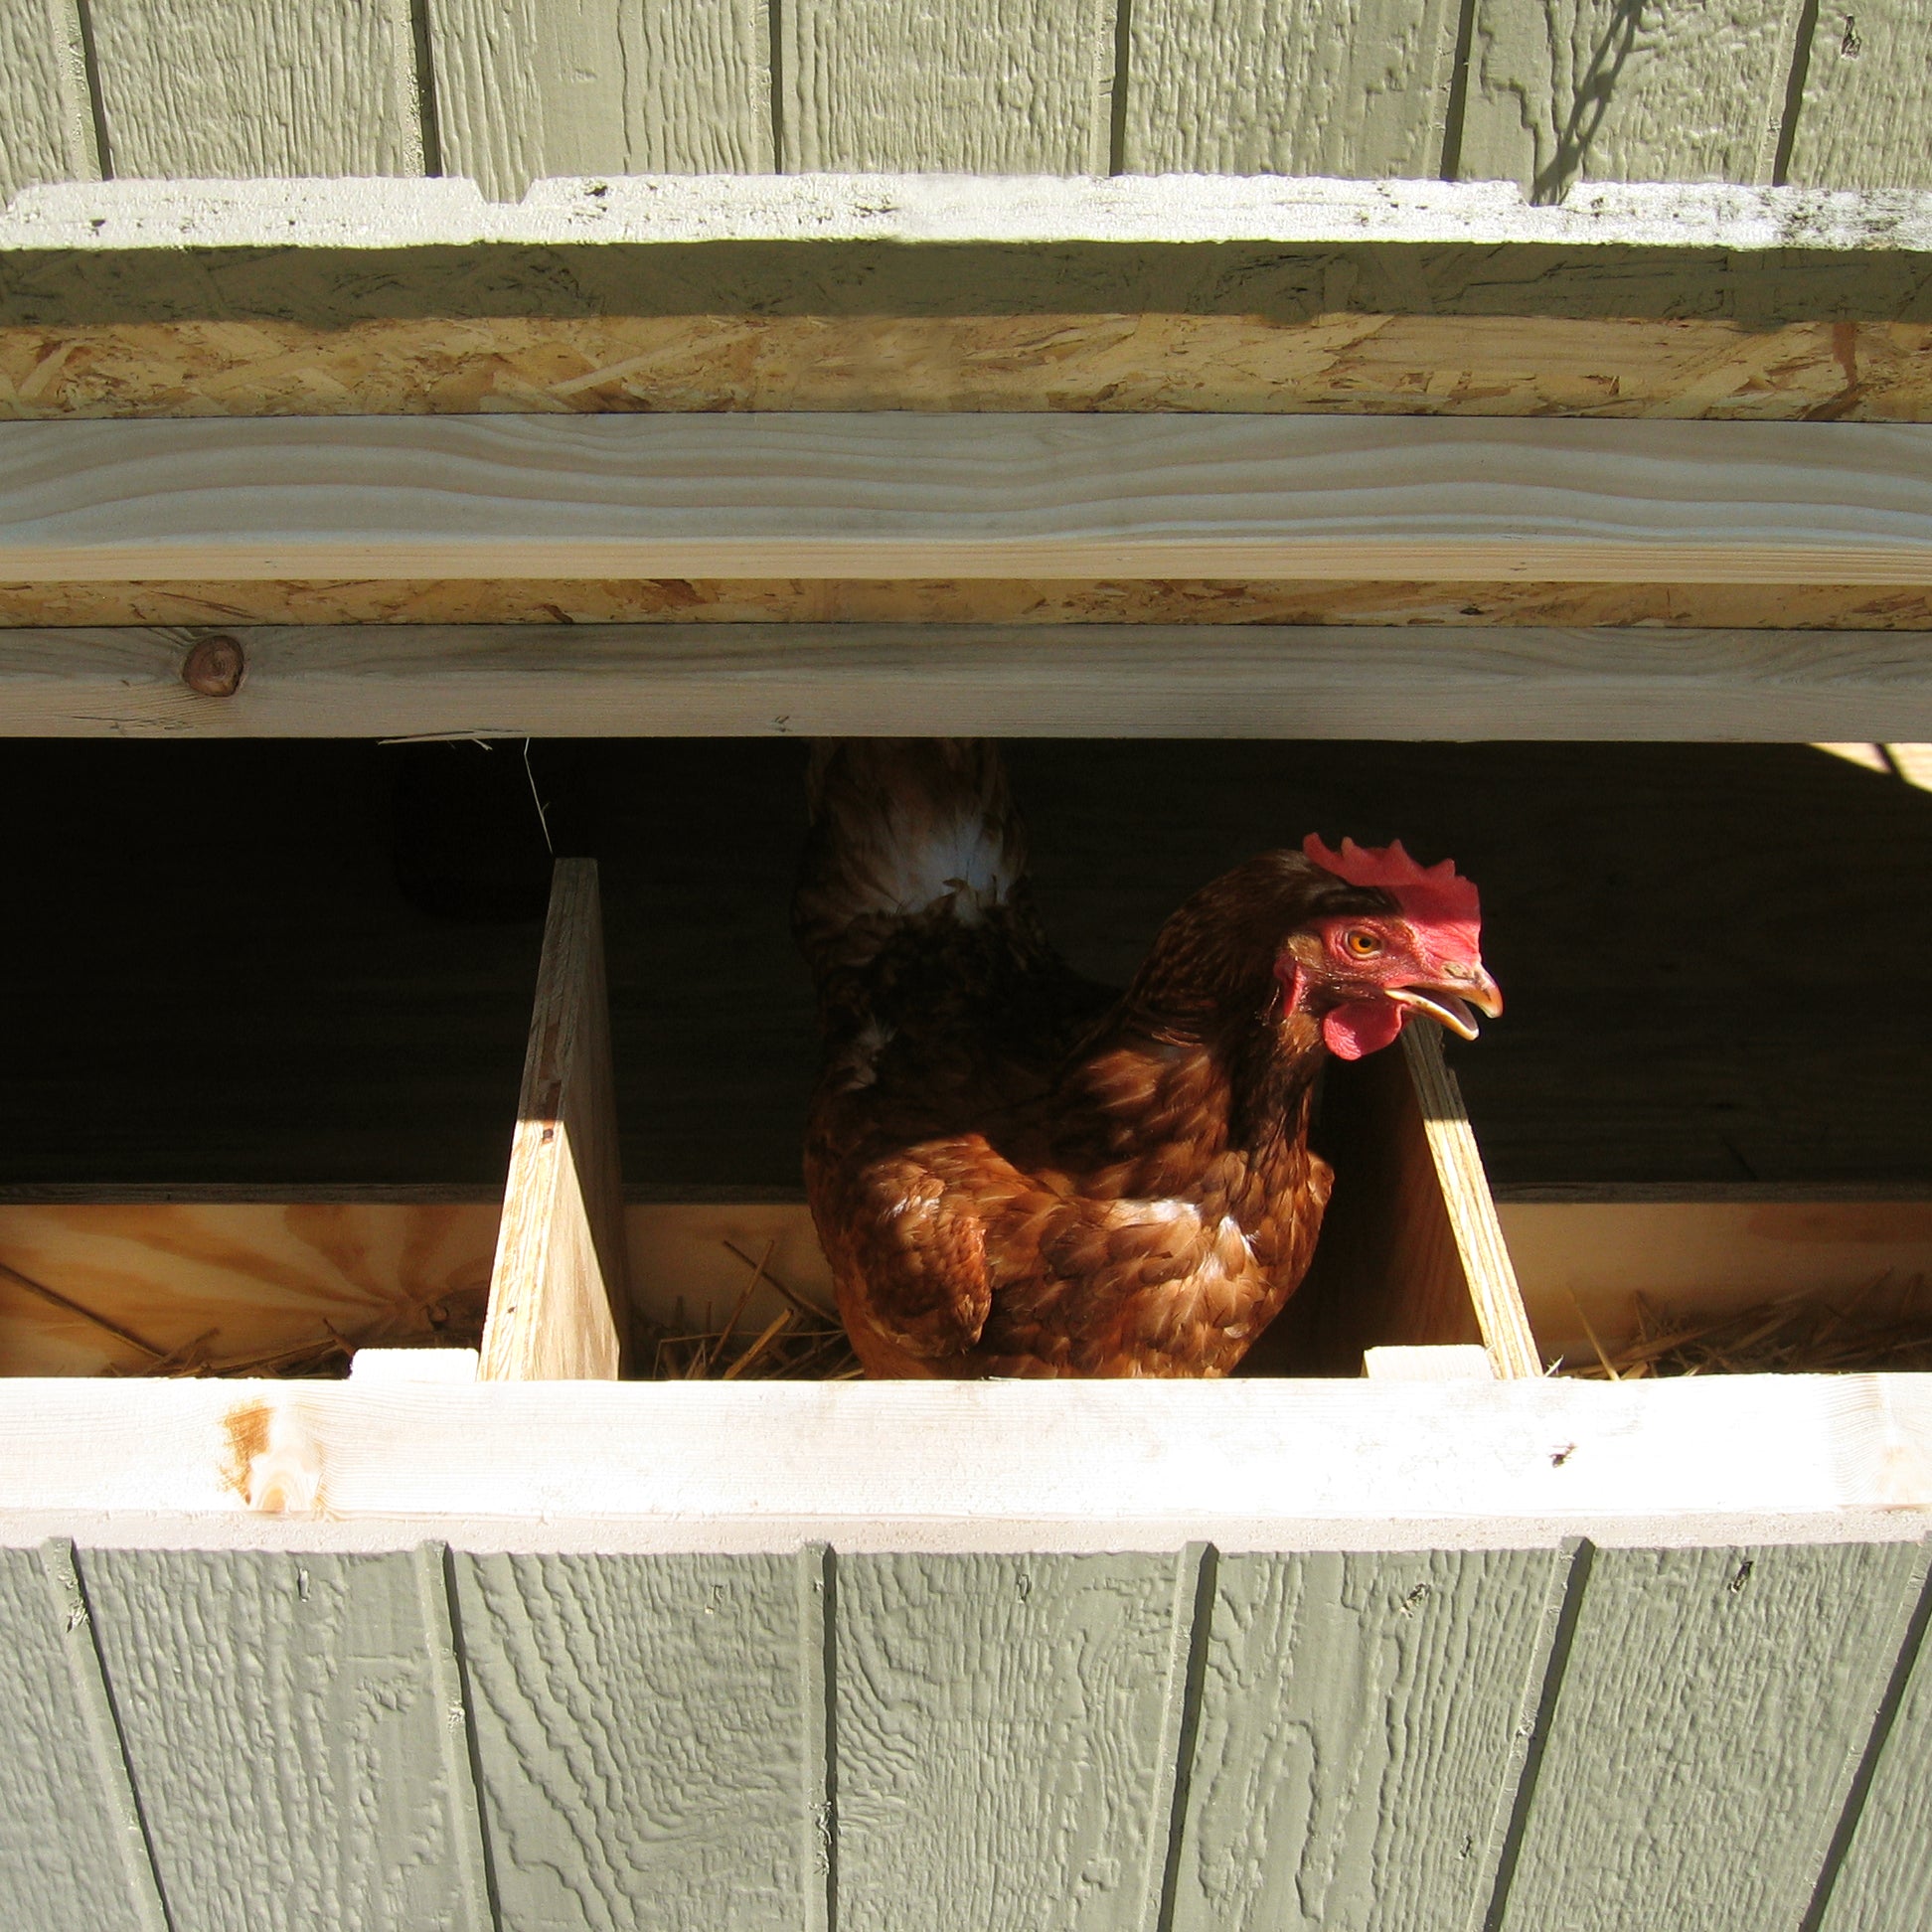 nesting boxes up close with chicken inside